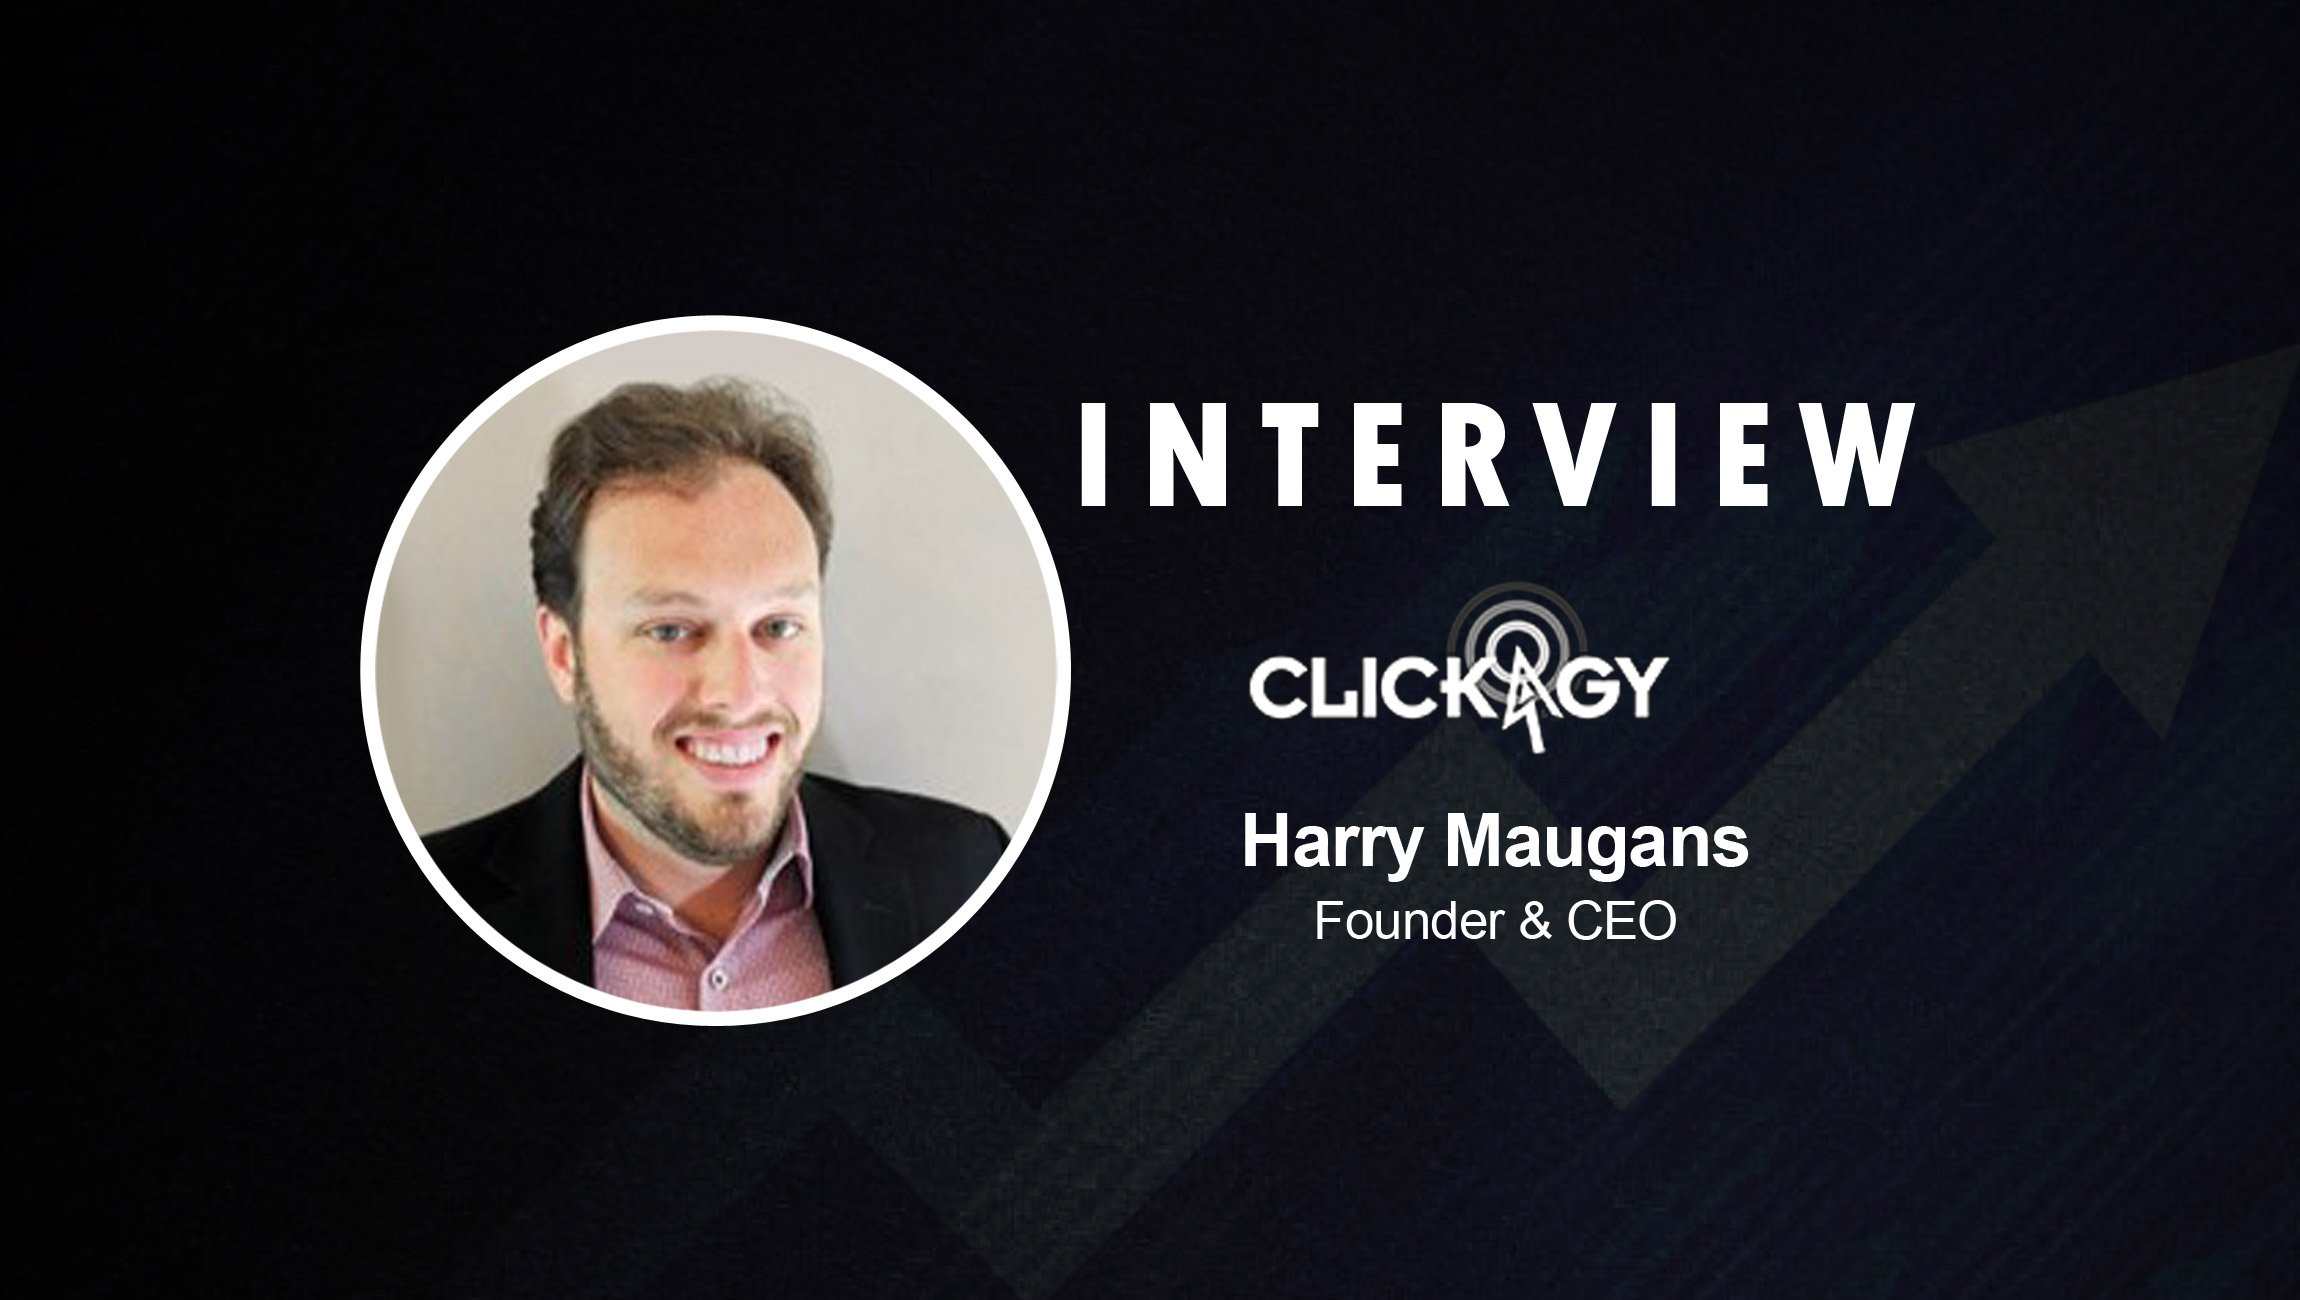 Salestechstar Interview With Harry Maugans, Founder and CEO at Clickagy